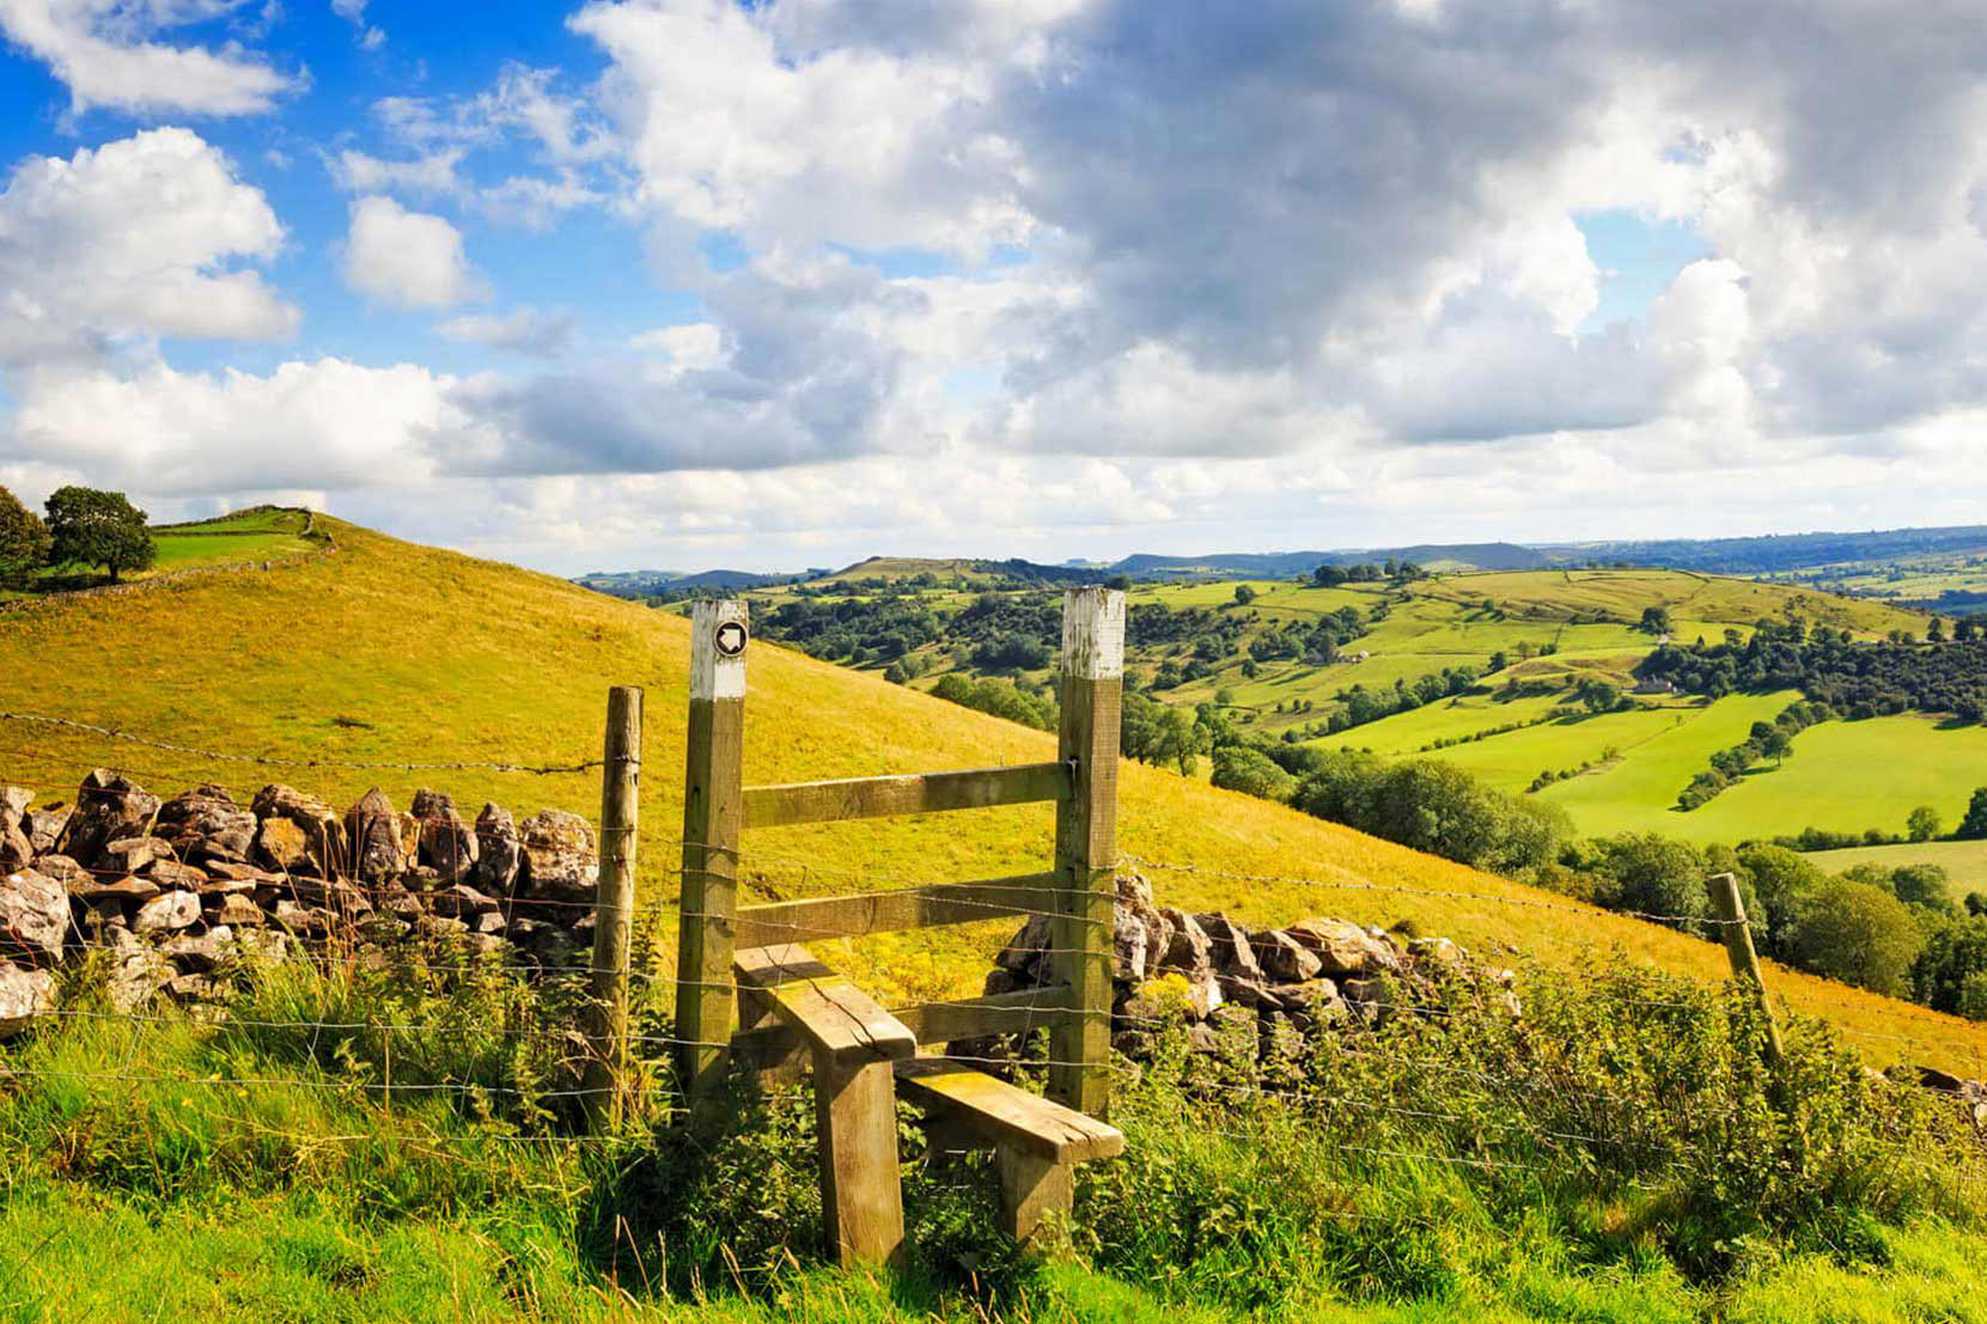 A scenic view of a stile over a dry stone wall with the Peak District countryside stretching of into the distance.